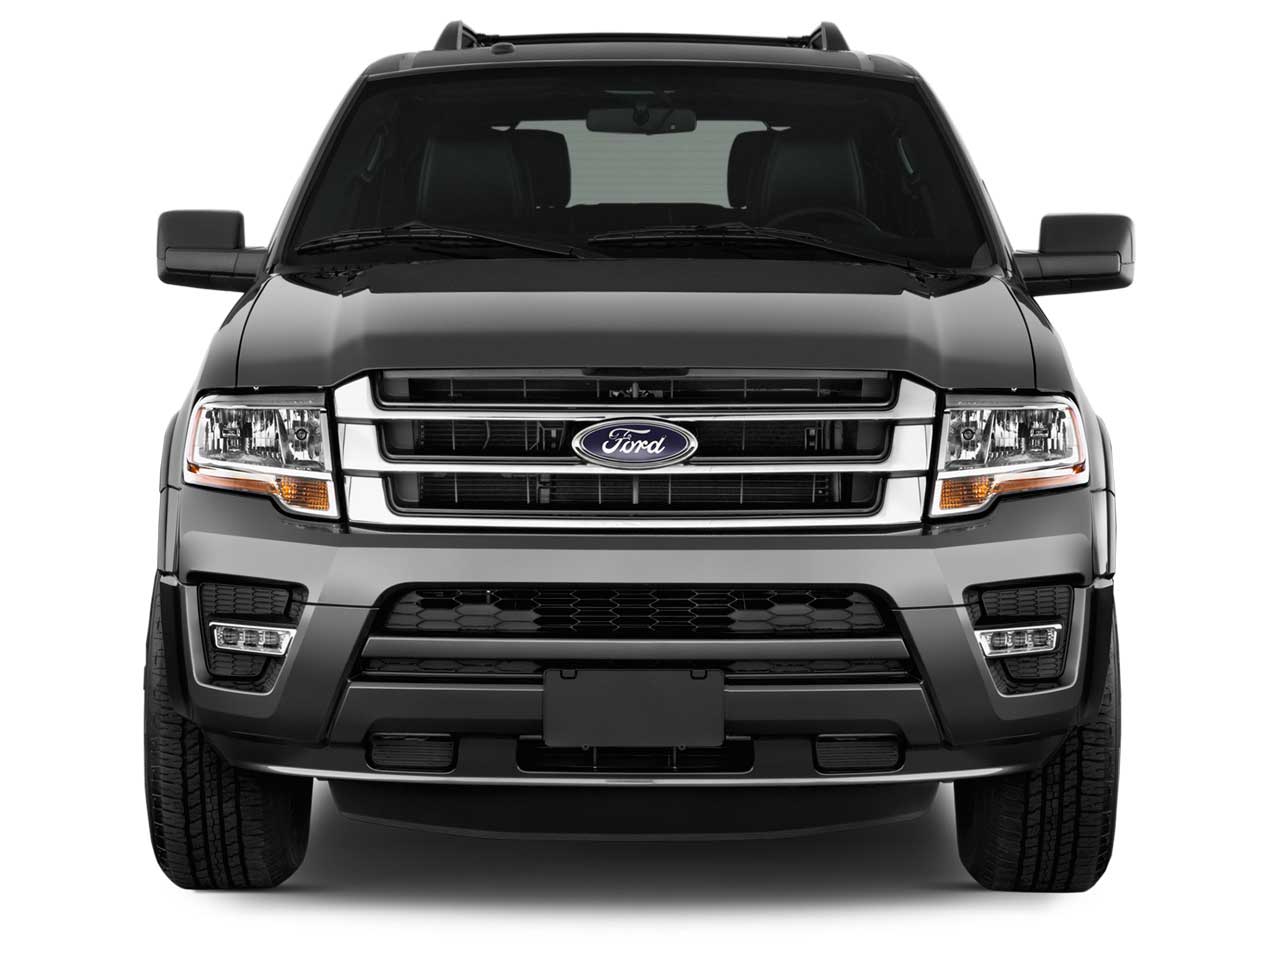 Ford Expedition XLT Exterior front view